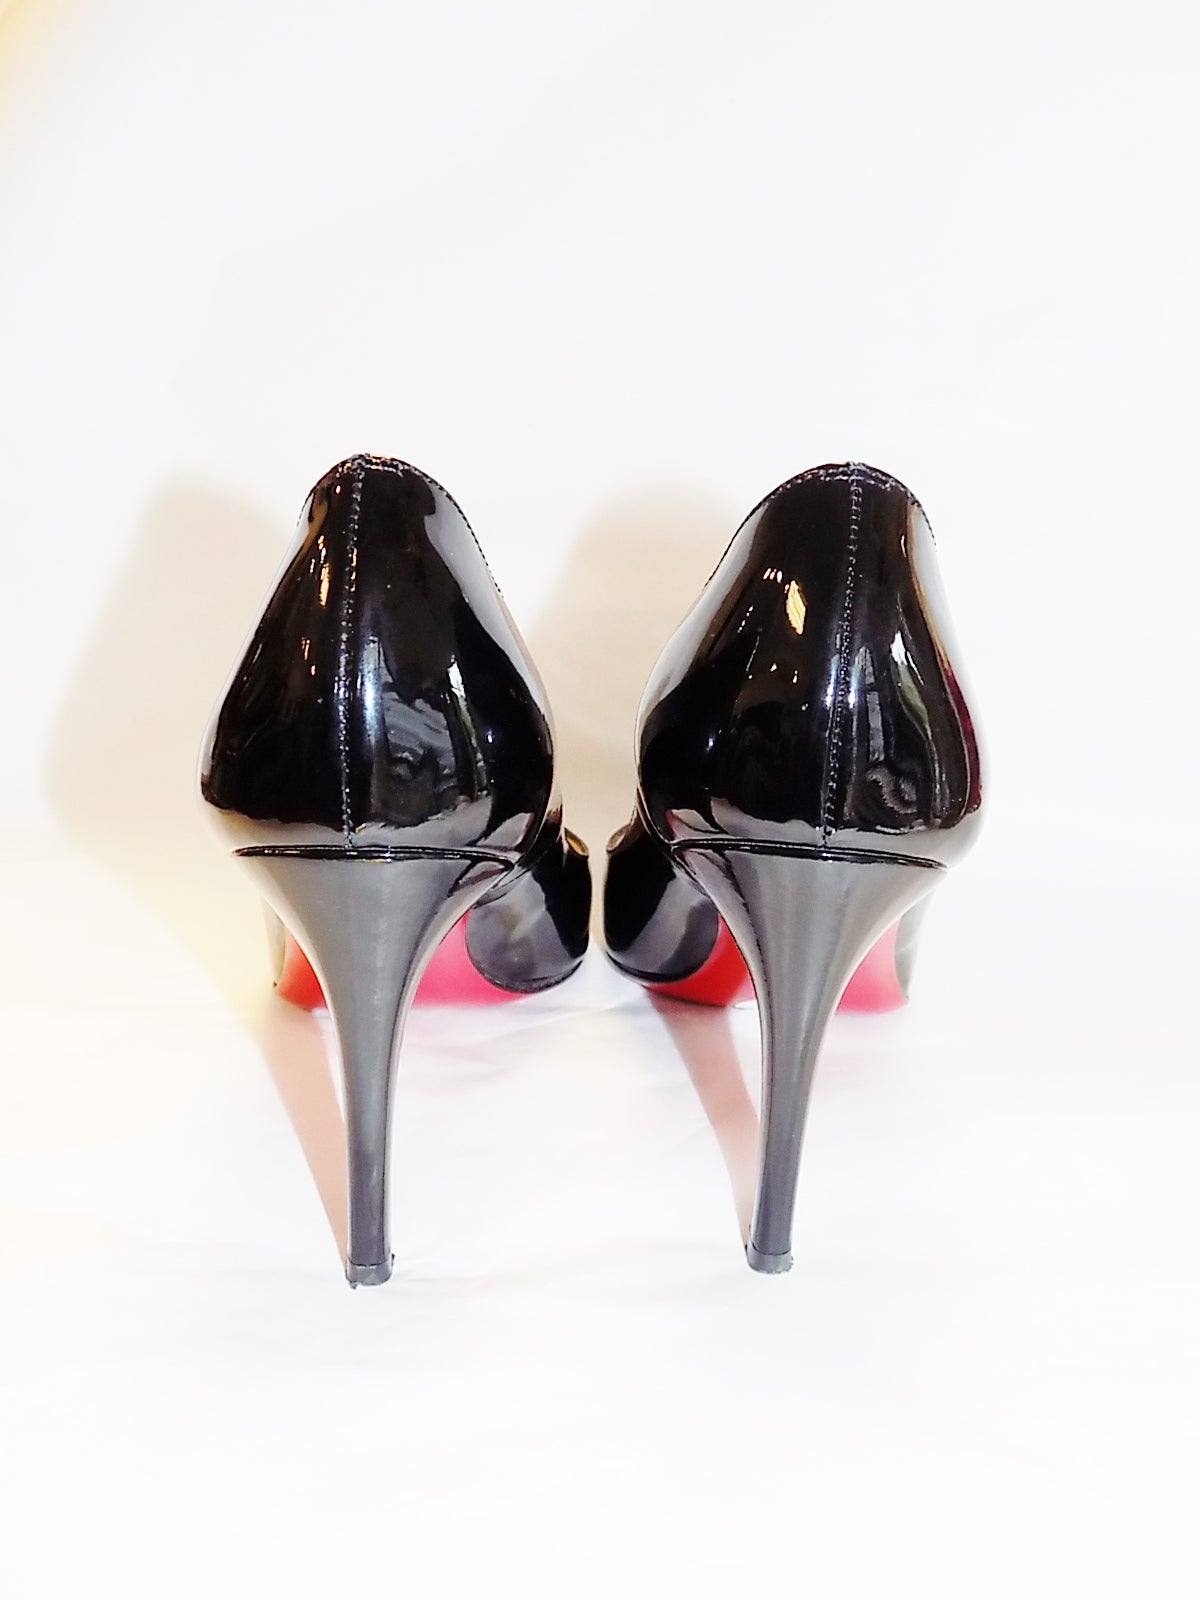 Gently worn in excellent condition Christian Louboutin black simple pump patent calf leather  in sz 37 . Shipped in original box. Heel 3.5